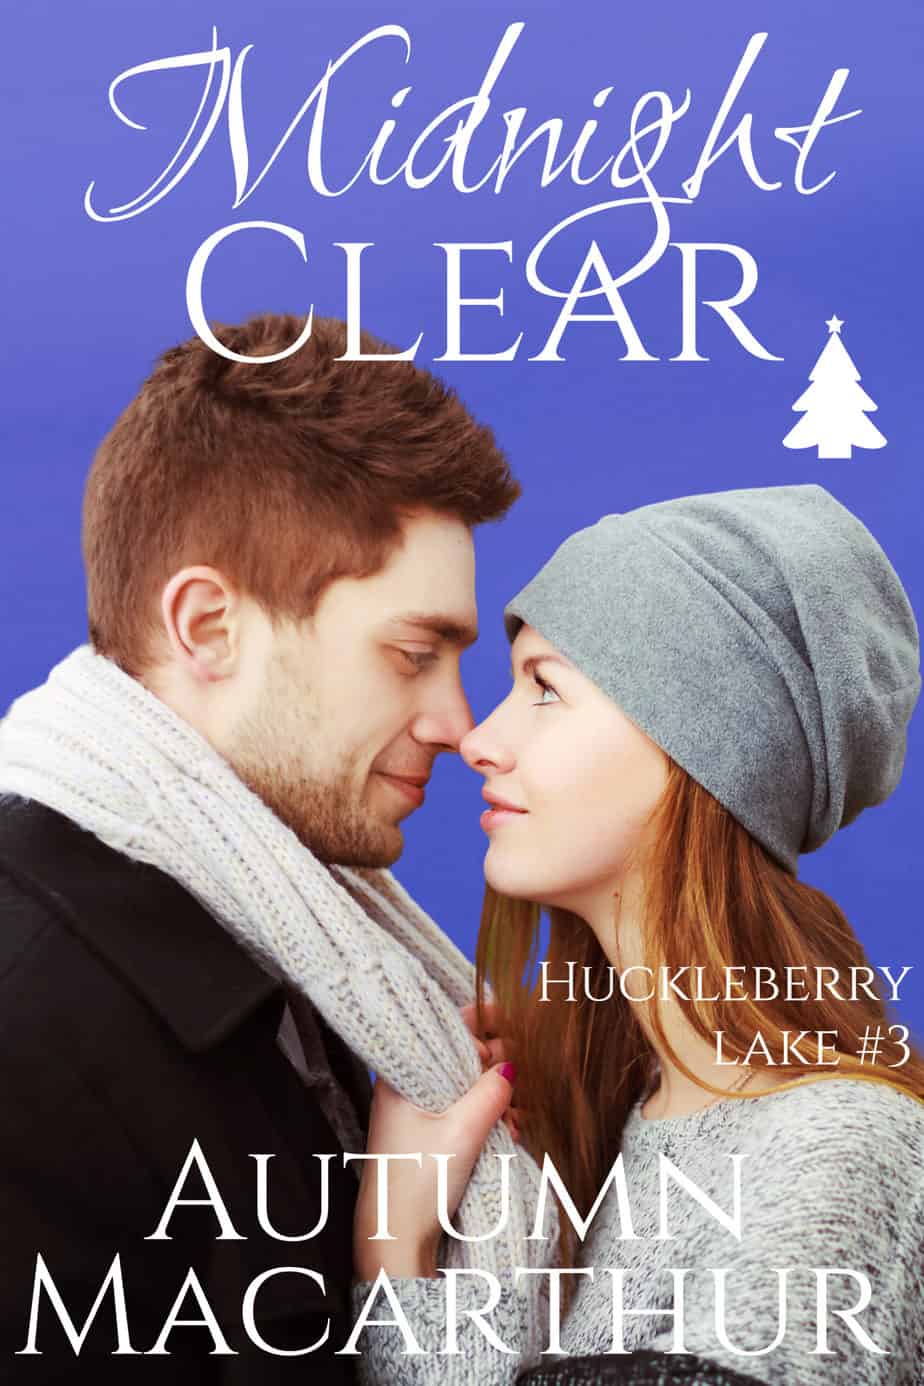 Cover image for sweet and clean Idaho set Christmas romance novella, Midnight Clear, by Christian author Autumn Macarthur